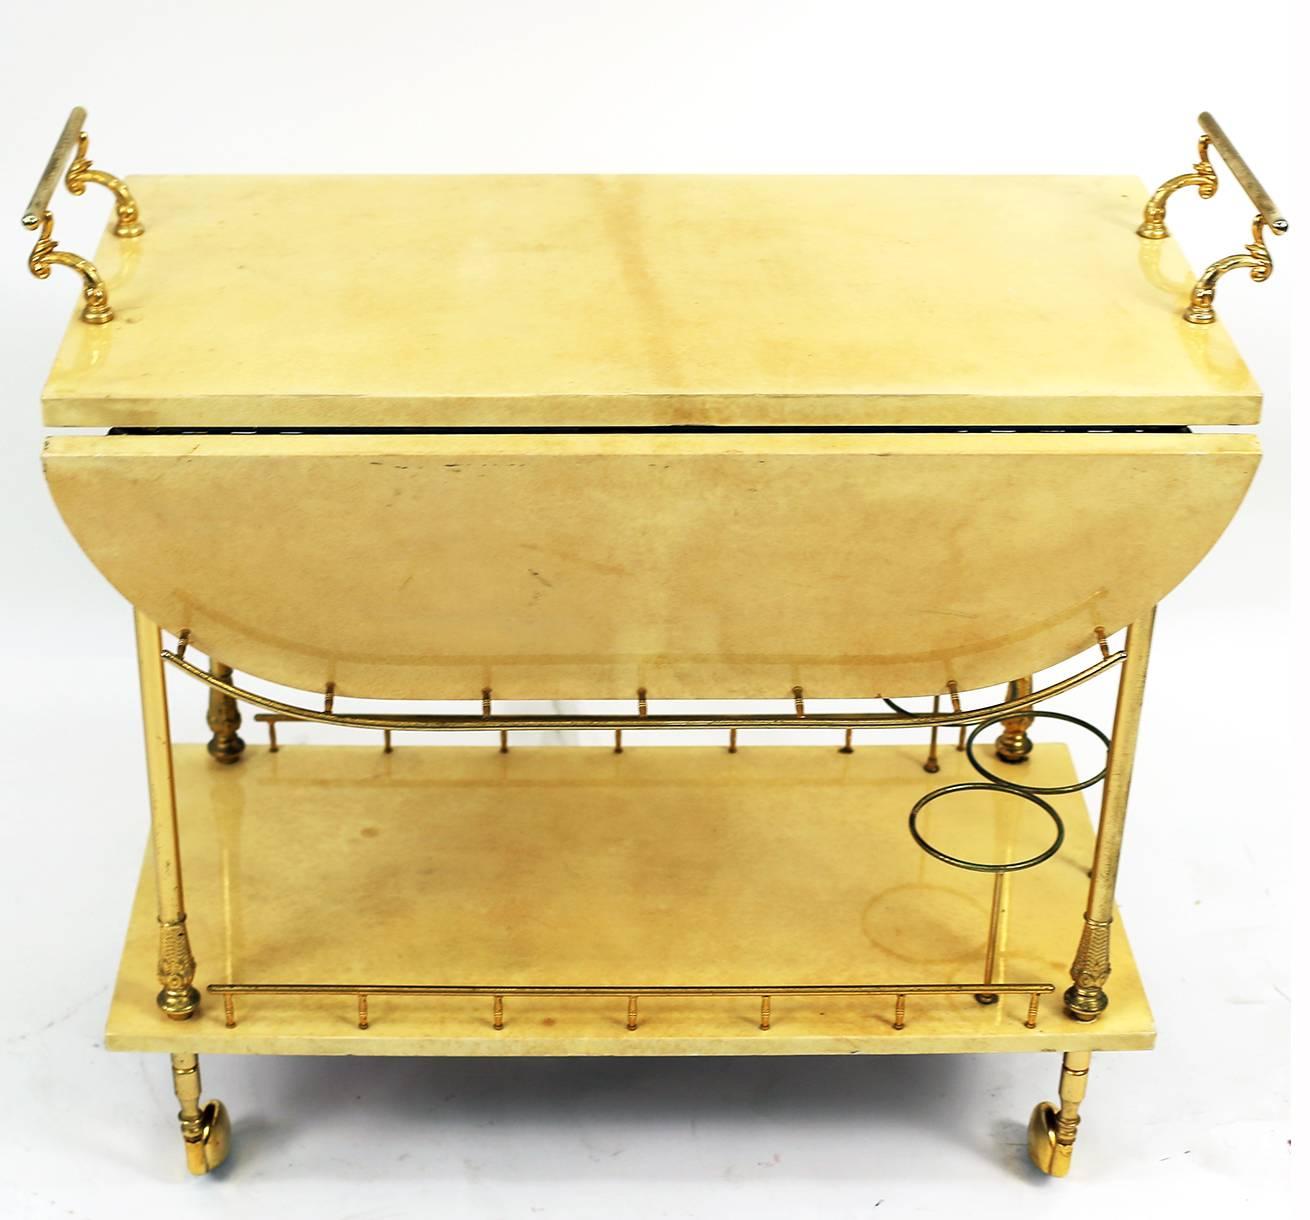 A beautiful ecru colored Aldo Tura lacquered goatskin two level bar cart trolley with drop down leaves and brass detailing. Excellent condition. 

Overall dimensions of cart with drop leaves extended are 31 inches in length, 31 inches in depth and